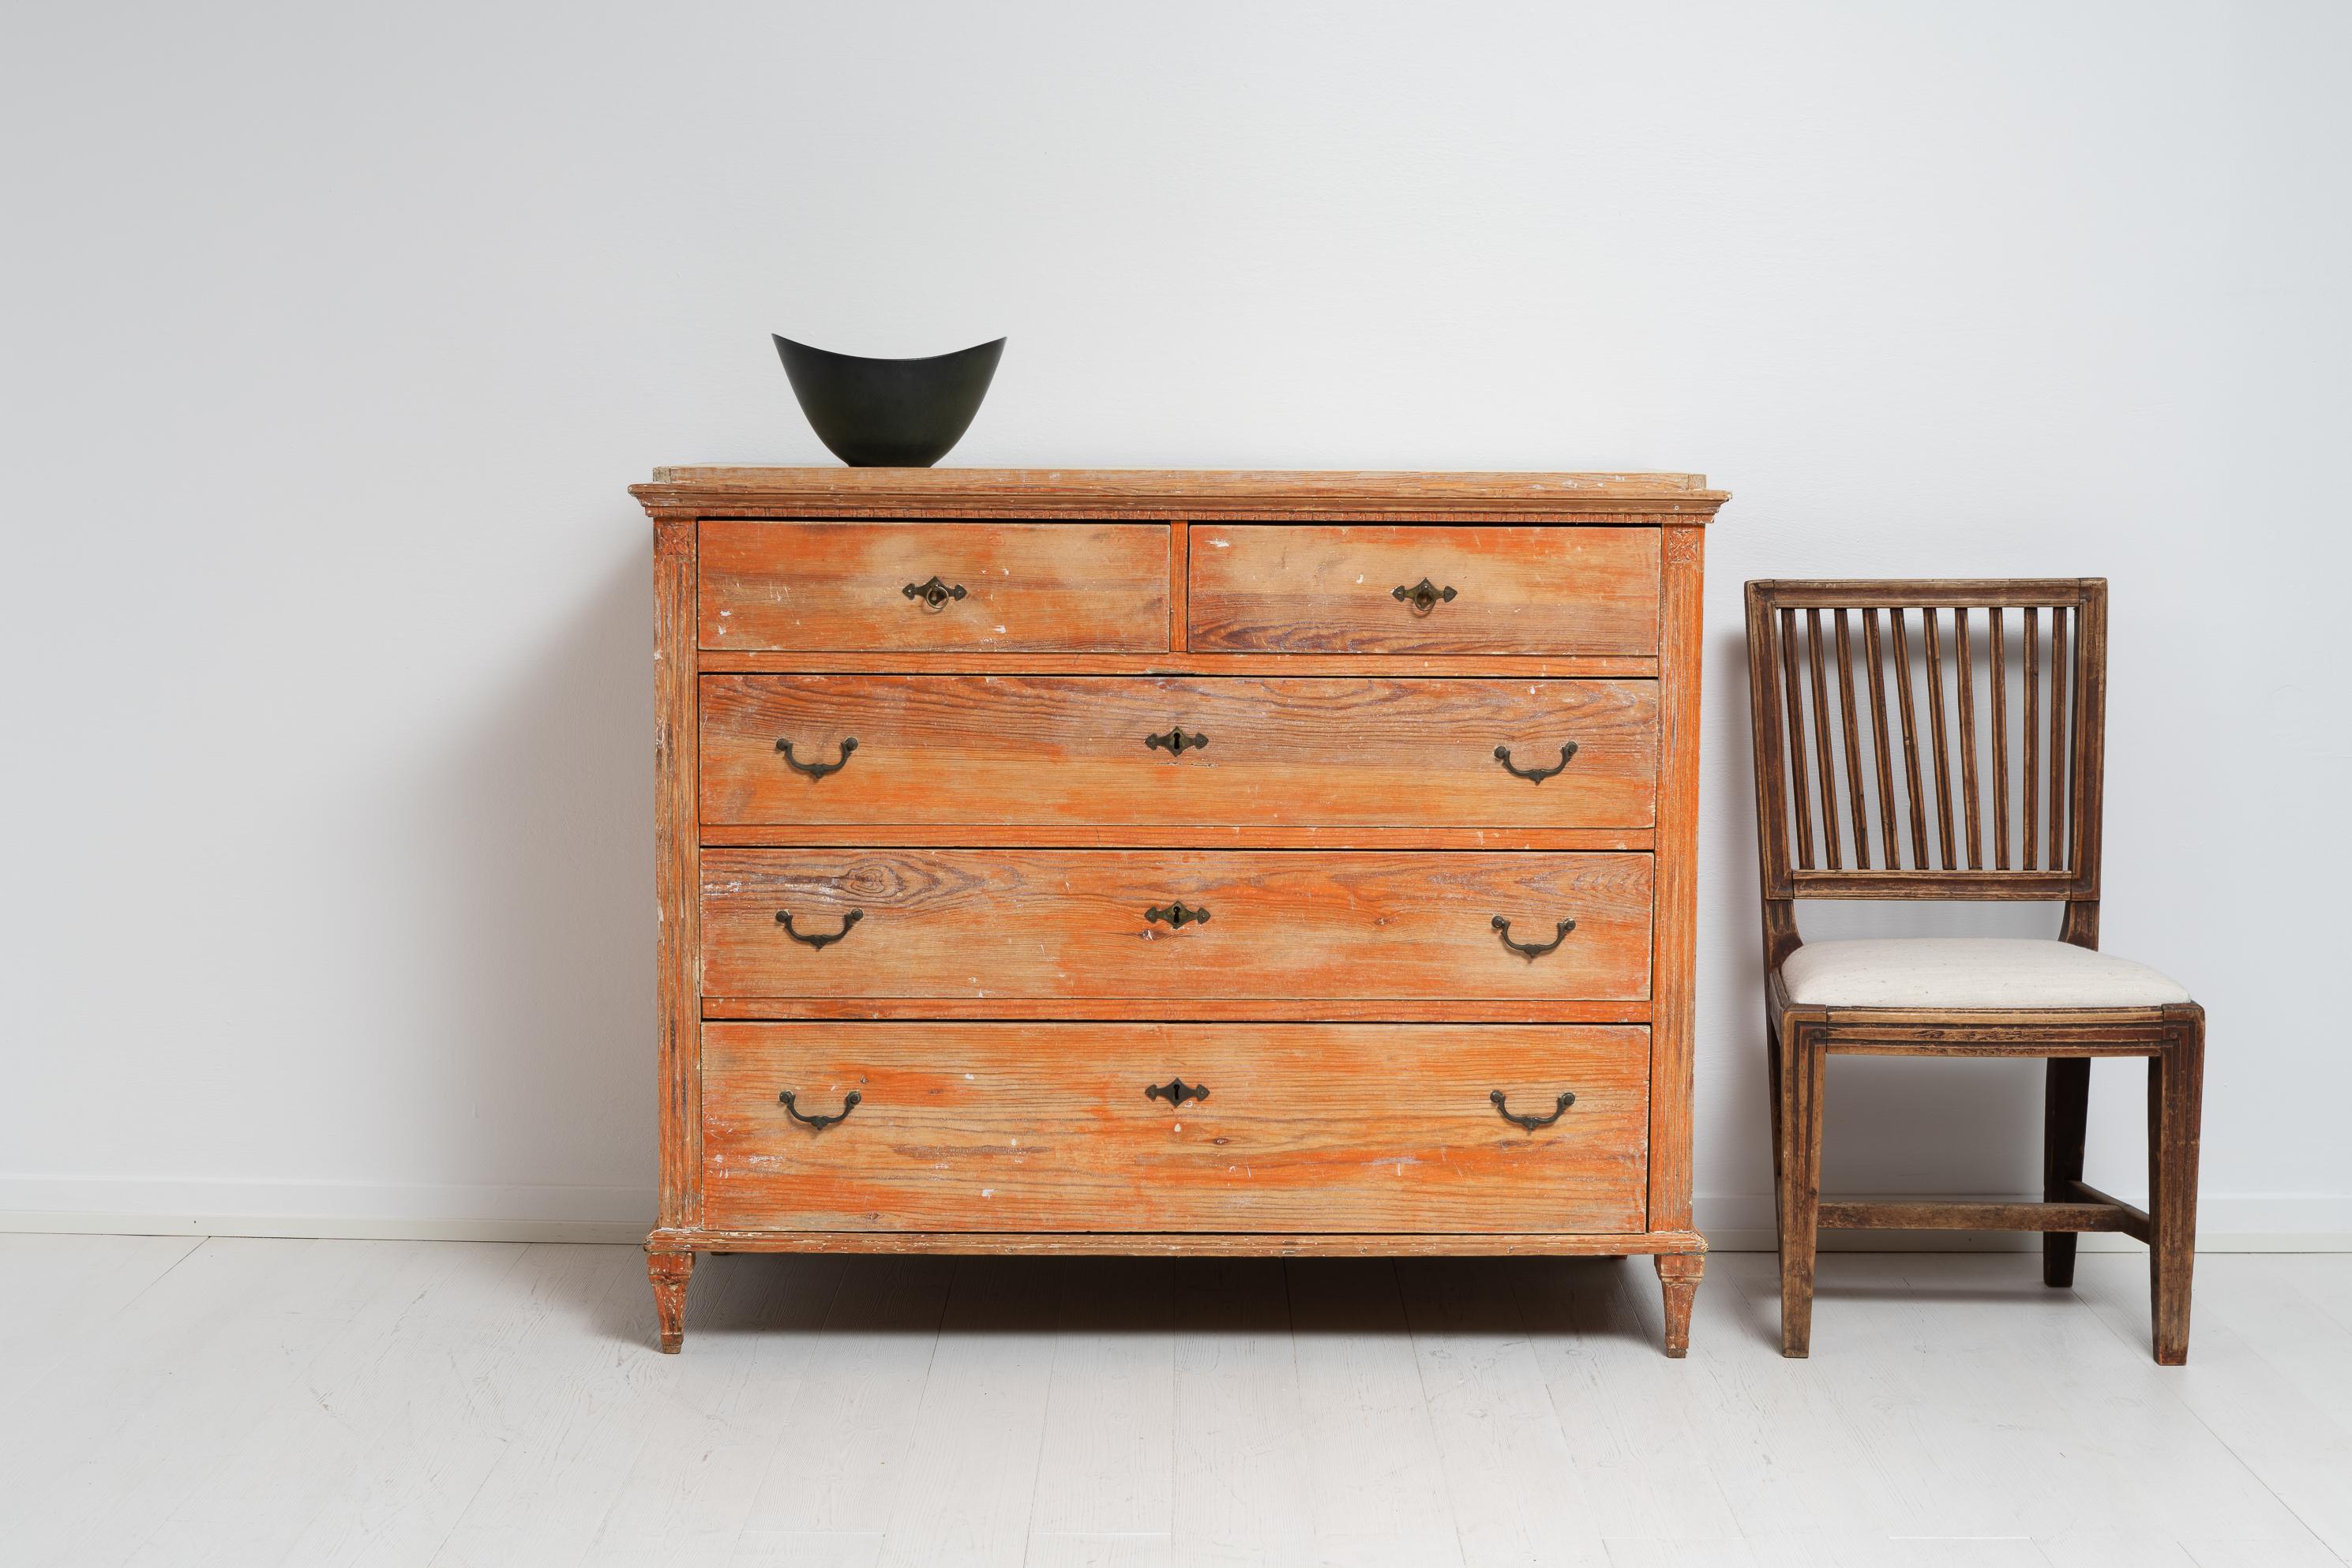 Northern Swedish painted gustavian chest in pine made during the late 18th century, 1790 to 1800. The chest has all the typical characteristics of a gustavian furniture with straight lines and fine details. Those can be seen in the fluted edges on